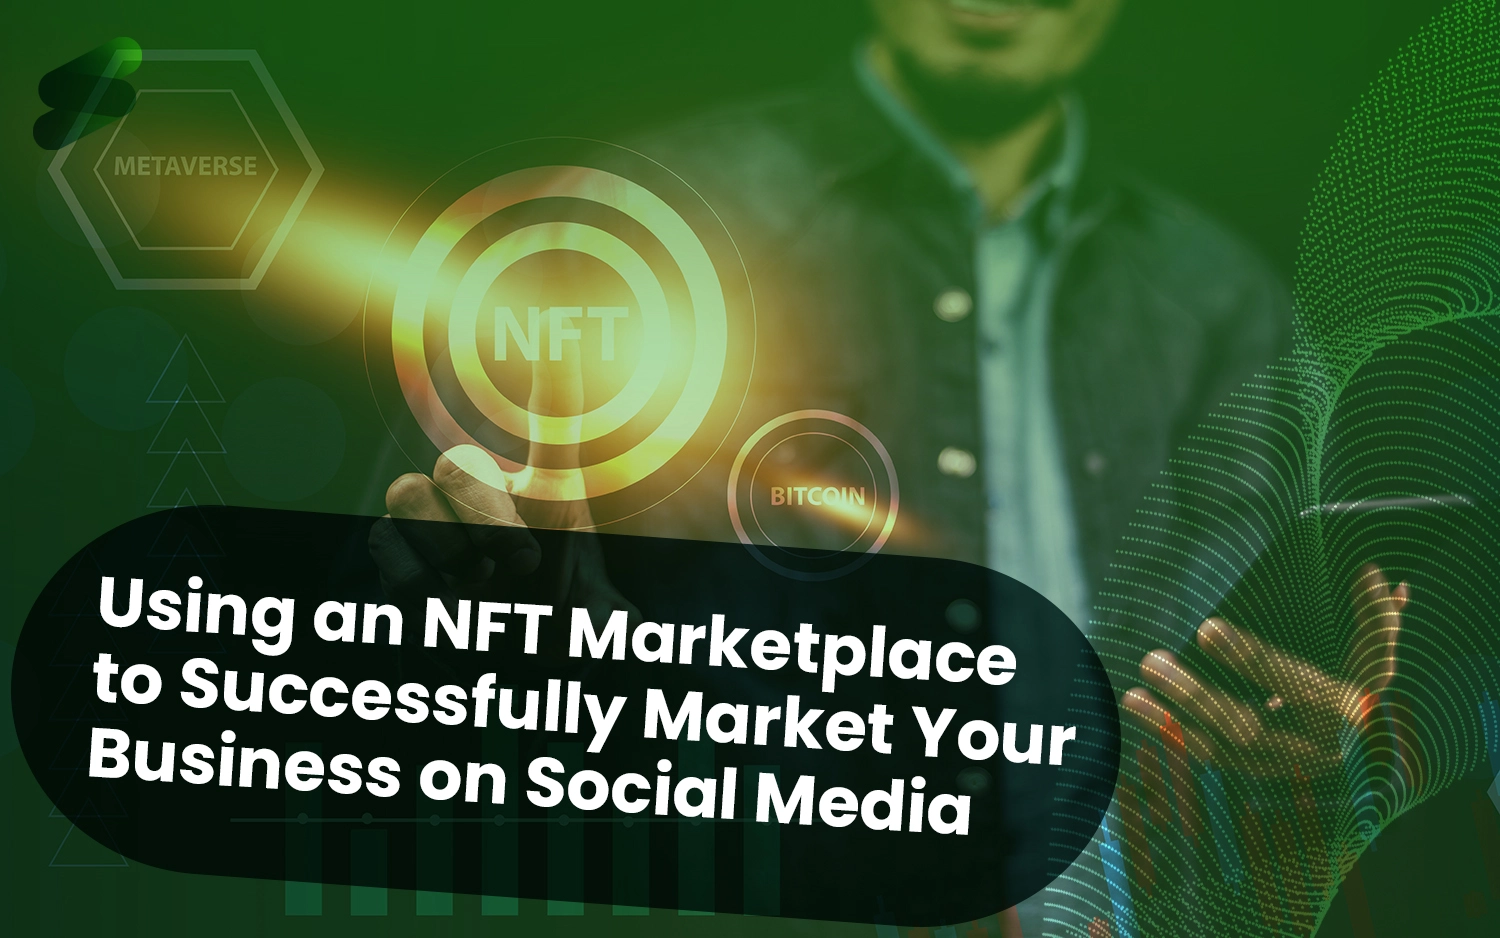 Tips for Using an NFT Marketplace